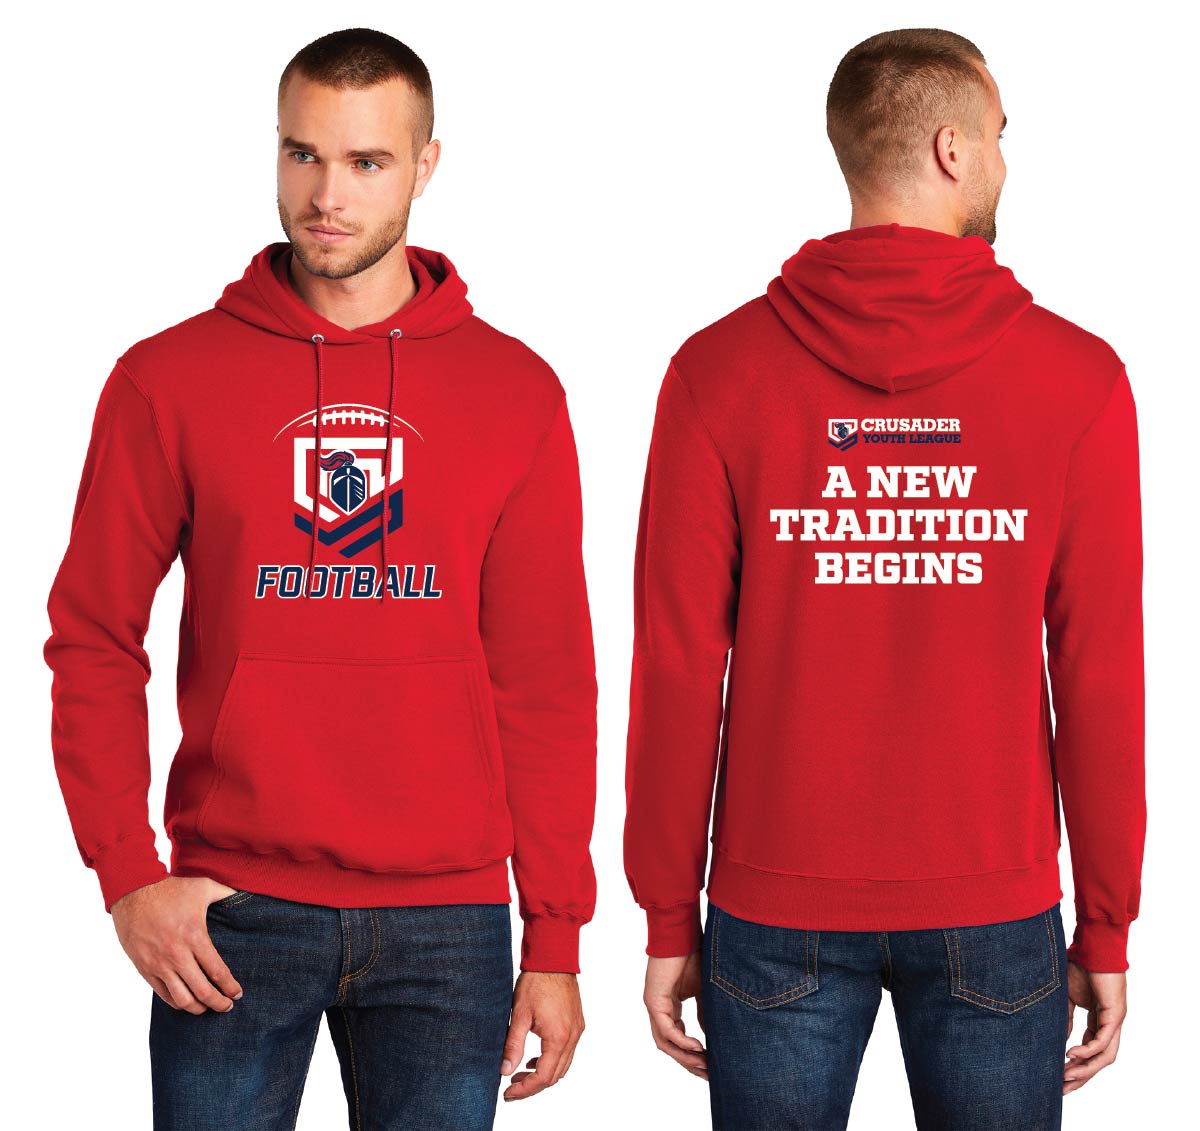 A New Tradition Begins - Hoodie